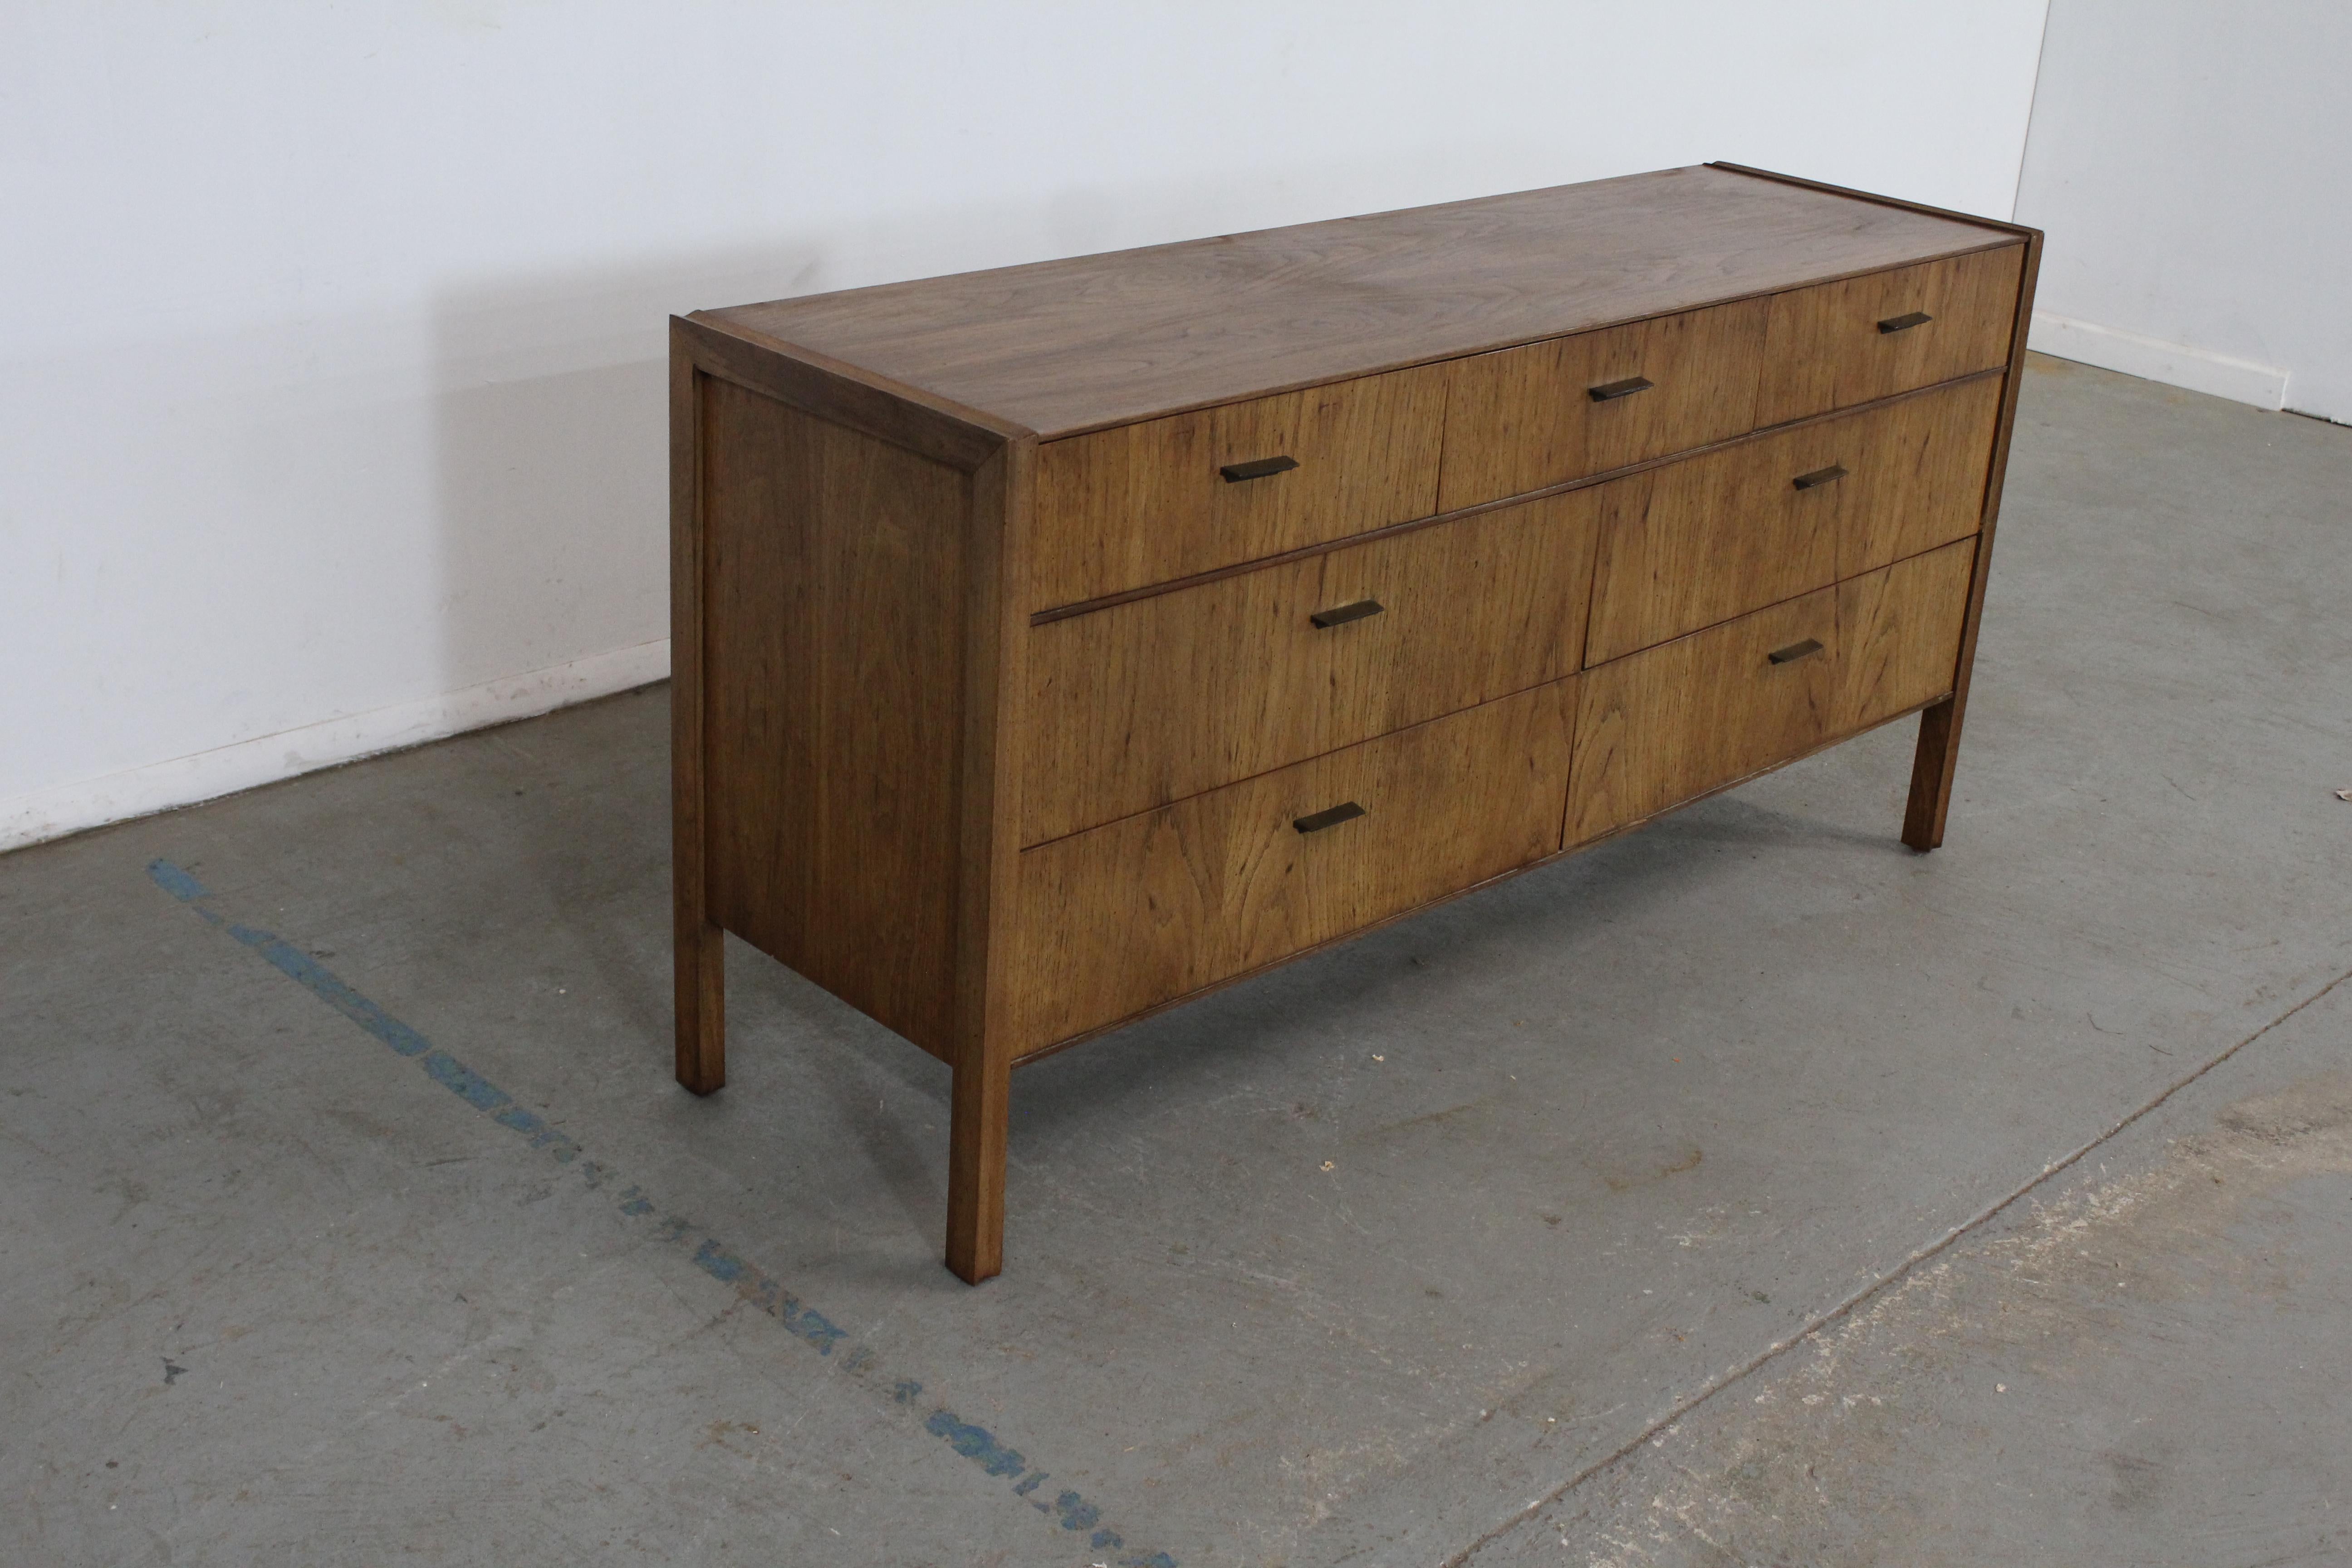 Mid-Century Modern walnut Jack Cartwright for Founders credenza/dresser

Offered is a beautiful Mid-Century Modern Walnut Jack Cartwright Founders Credenza/Dresser with ample storage space, which was manufactured by Founders. Features 8 drawers. It